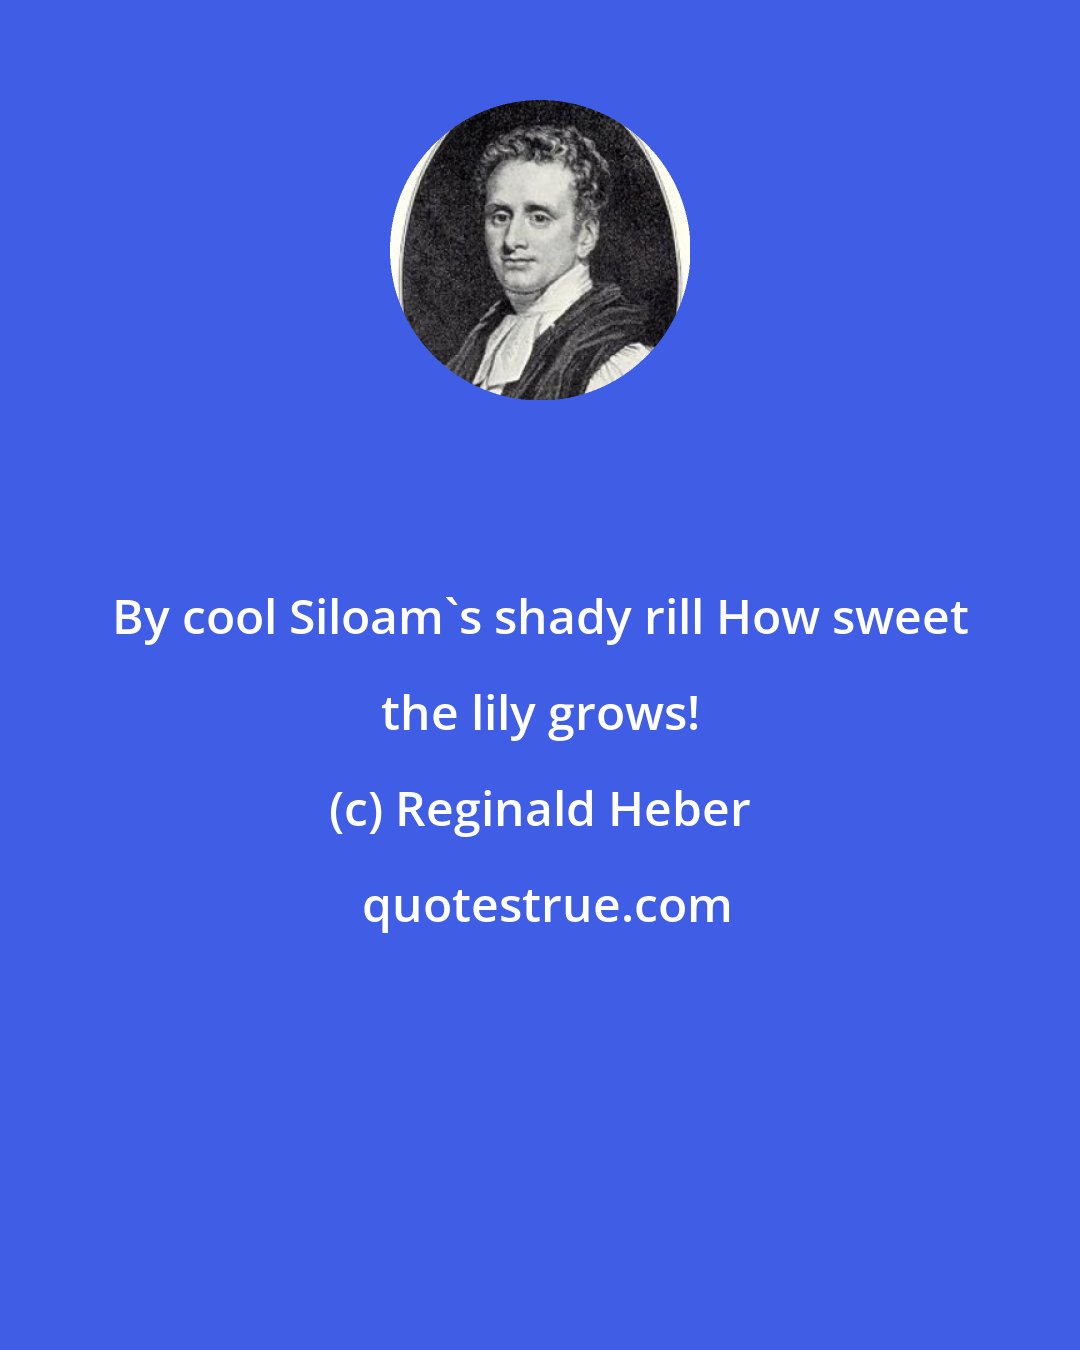 Reginald Heber: By cool Siloam's shady rill How sweet the lily grows!